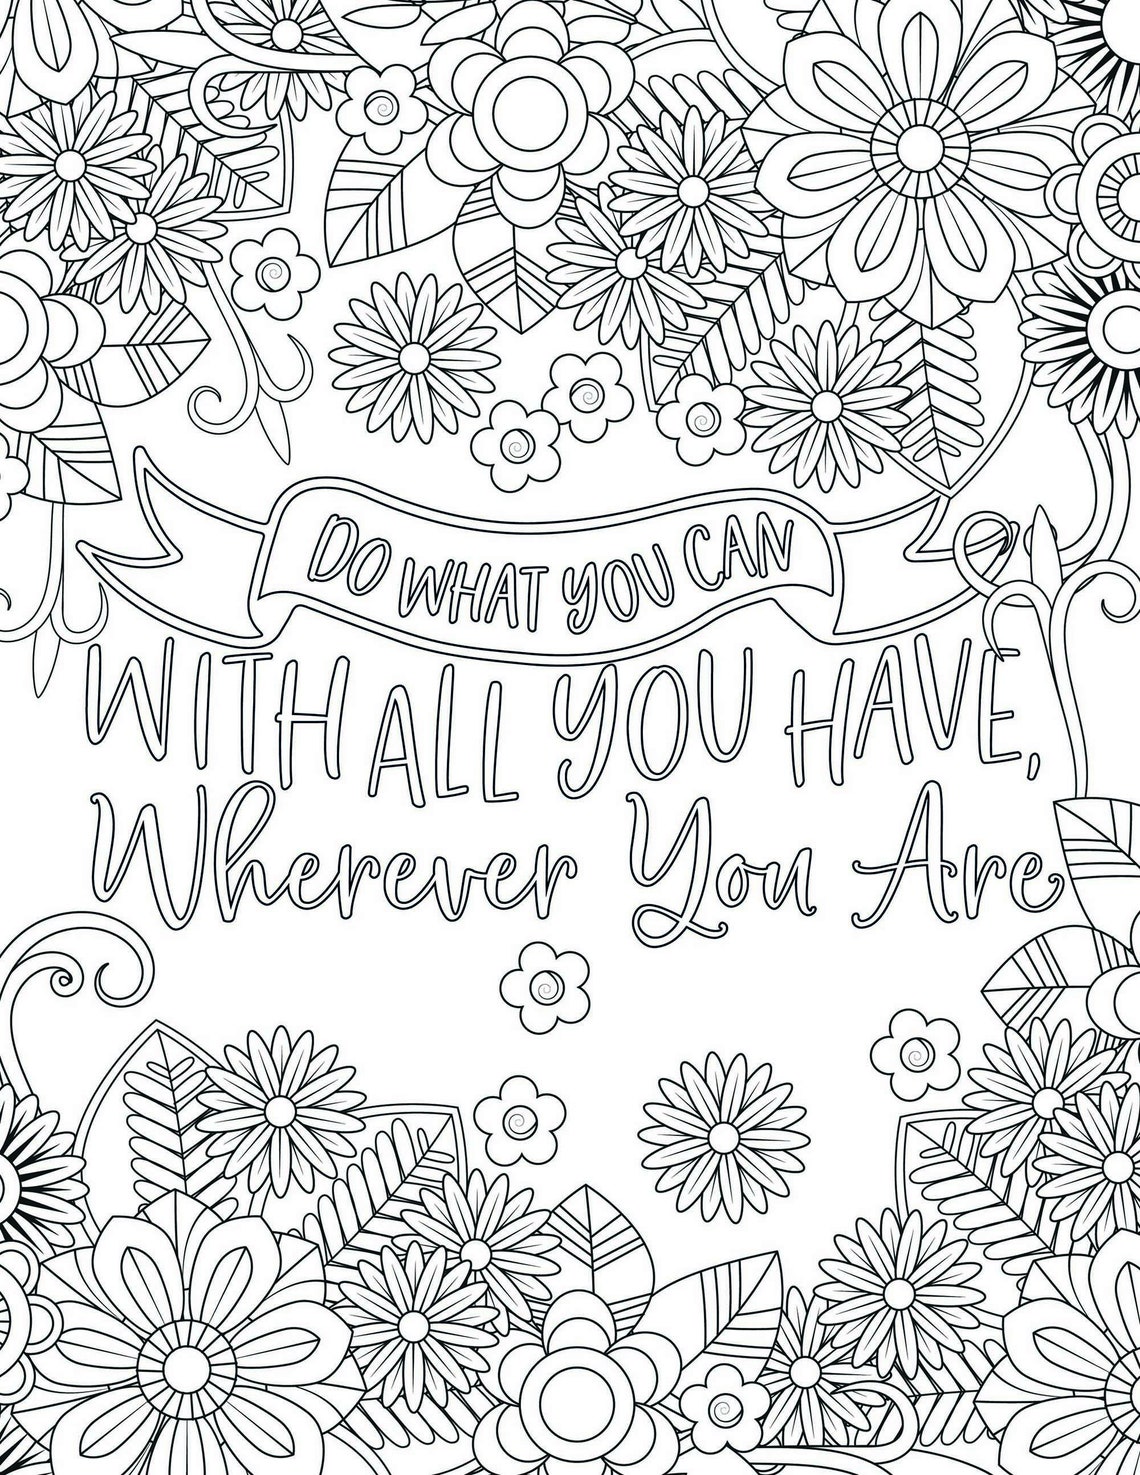 Motivational Coloring Book, Printable, Coloring Pages, Black and White ...